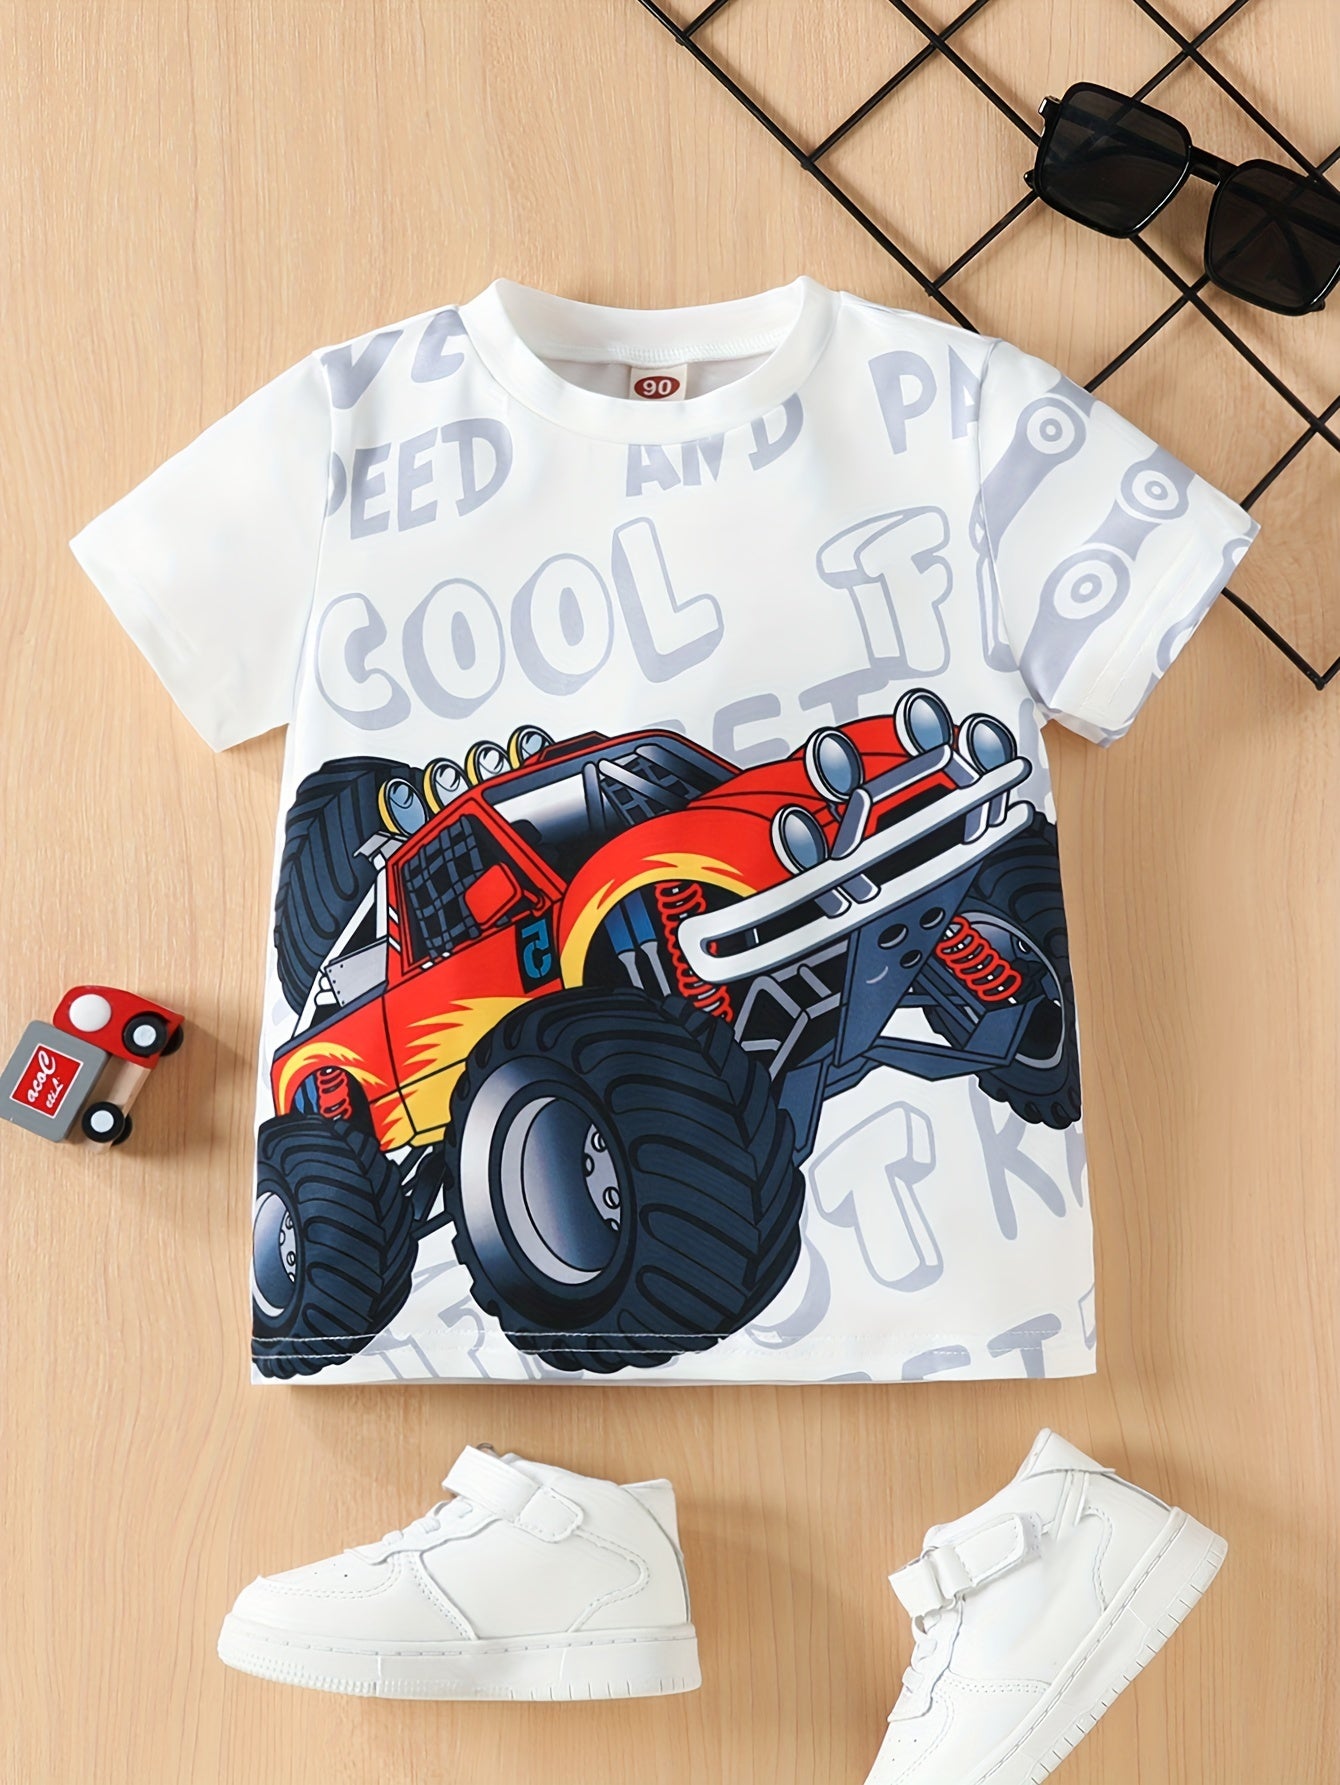 Stylish UNSPEAKABLE Letter Print Boys Creative T-shirt, Casual Lightweight Comfy Short Sleeve Crew Neck Tee Tops, Kids Clothings For Summer